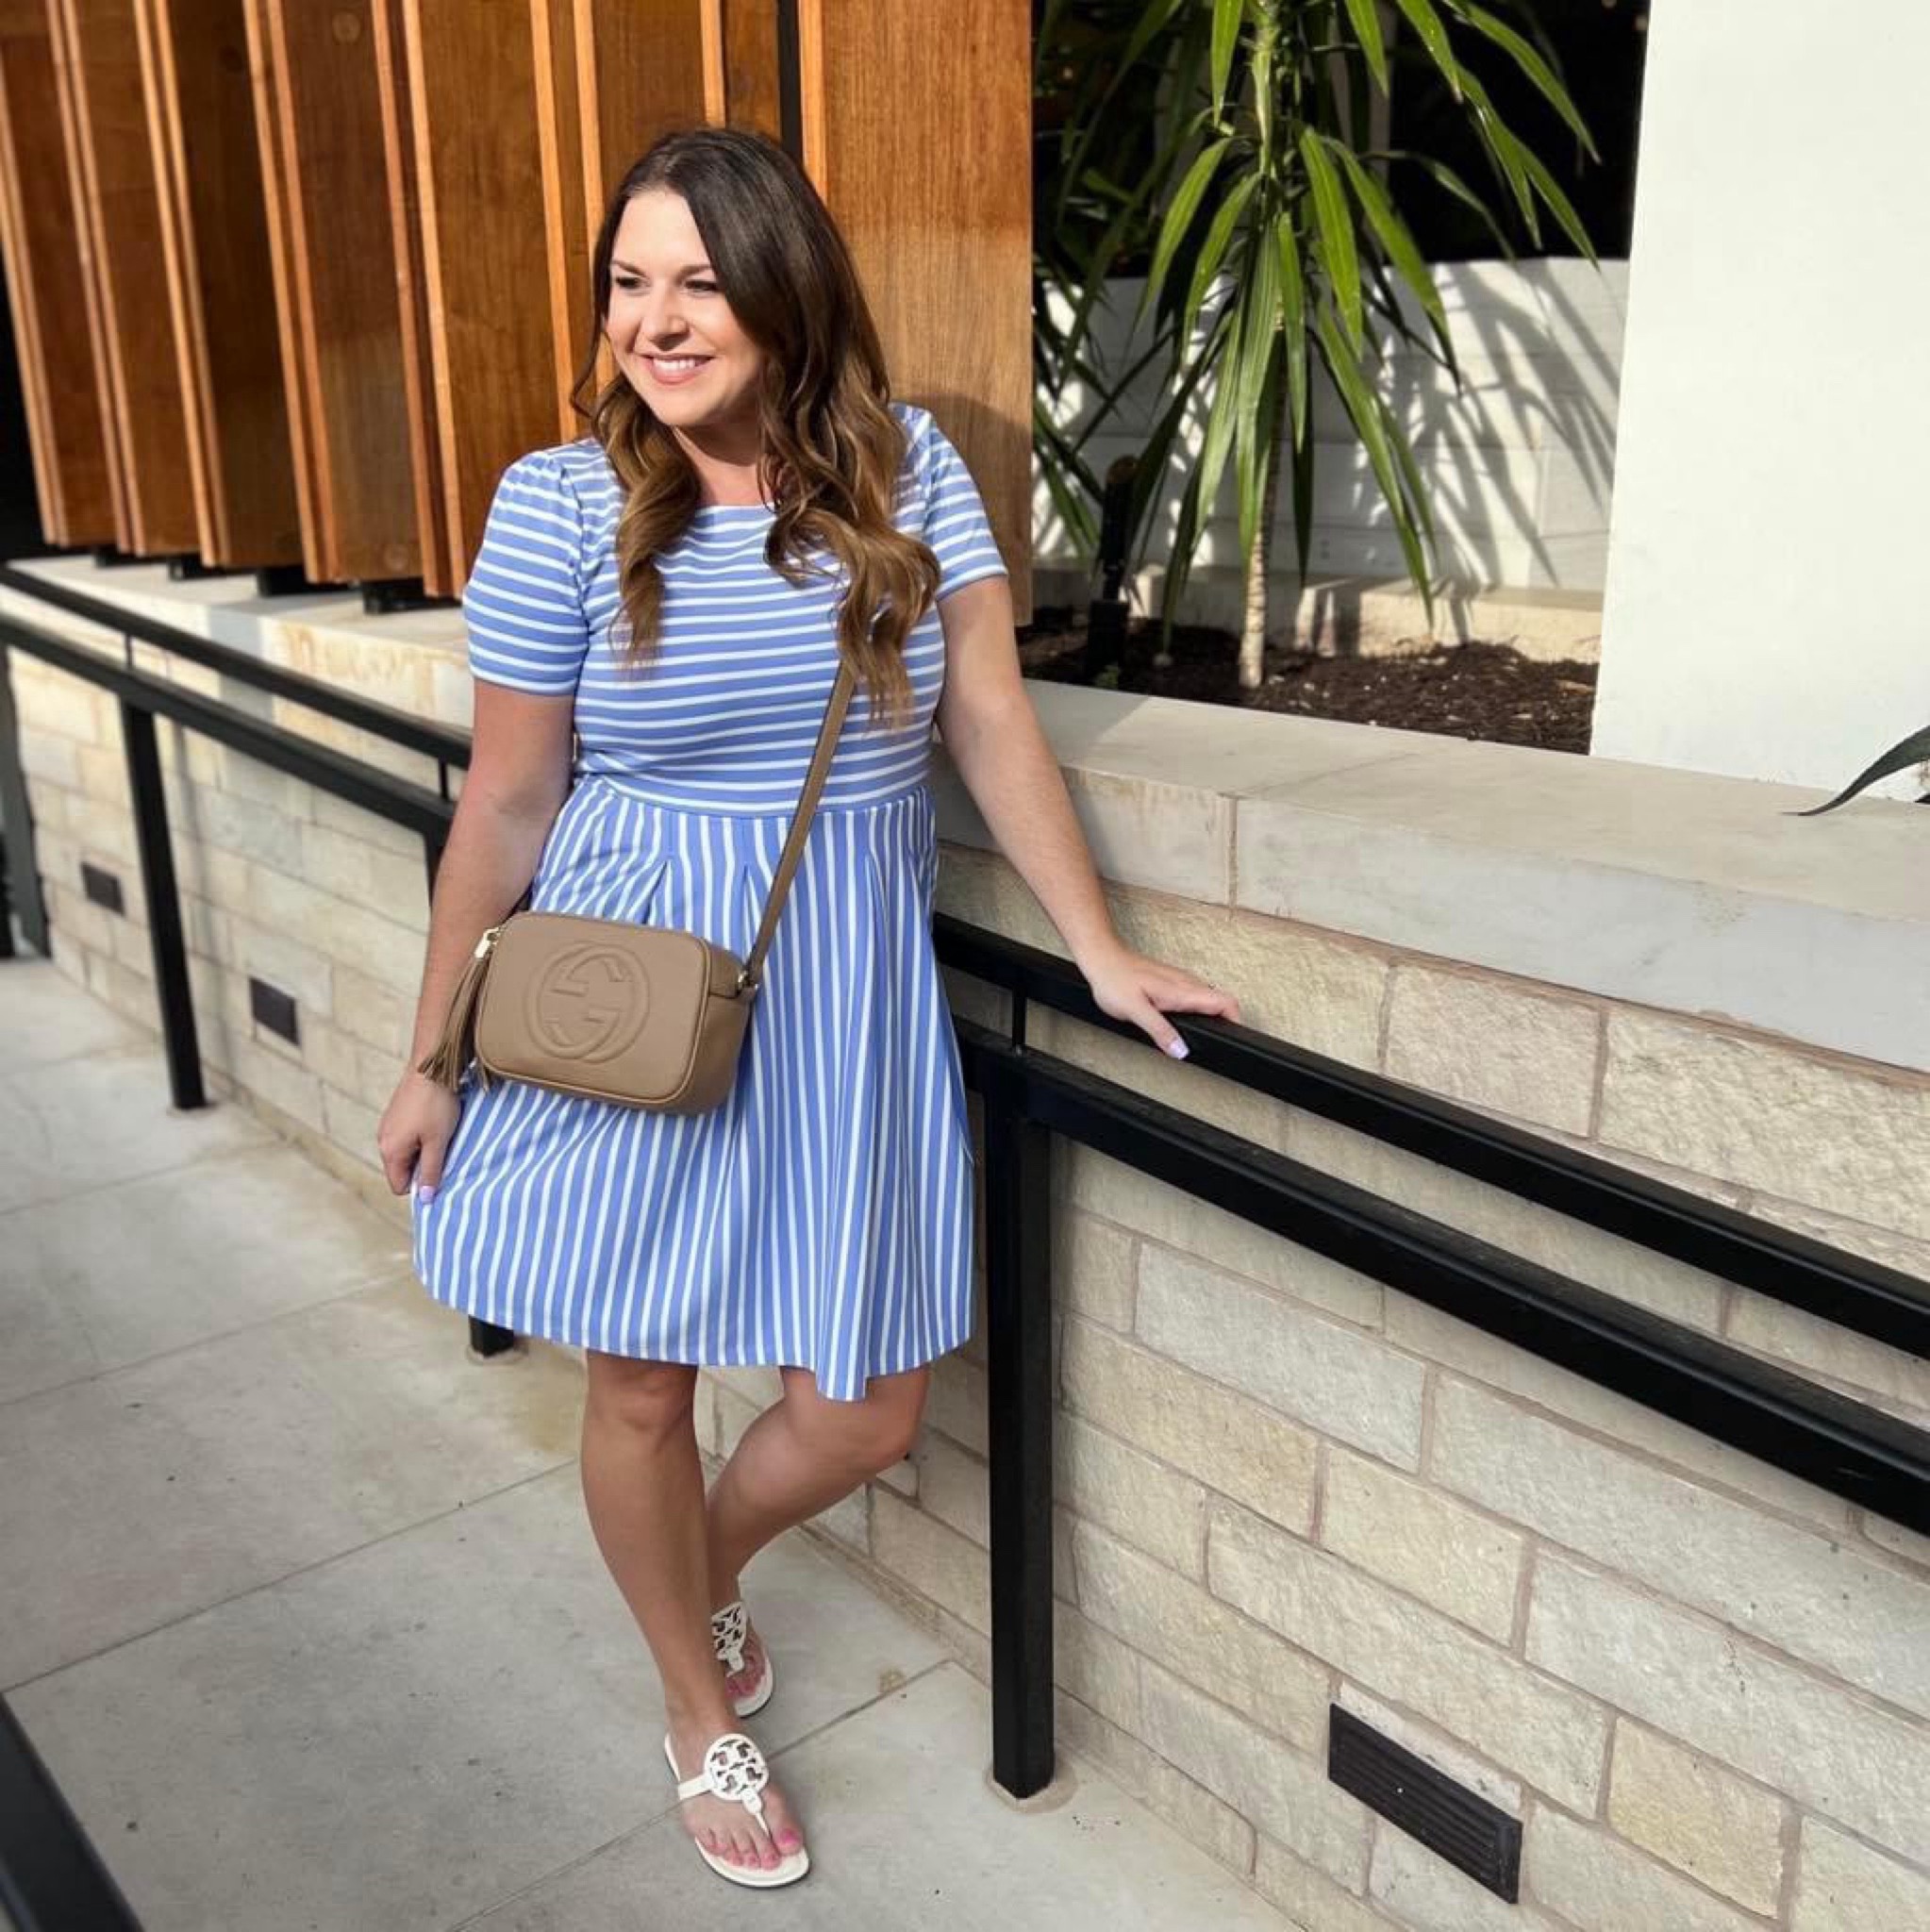 Chic & Comfortable: Spring Fashion for Teachers

spring, spring fashion, spring outfit, women's dresses, spring dresses, brunch outfit, crossbody bag